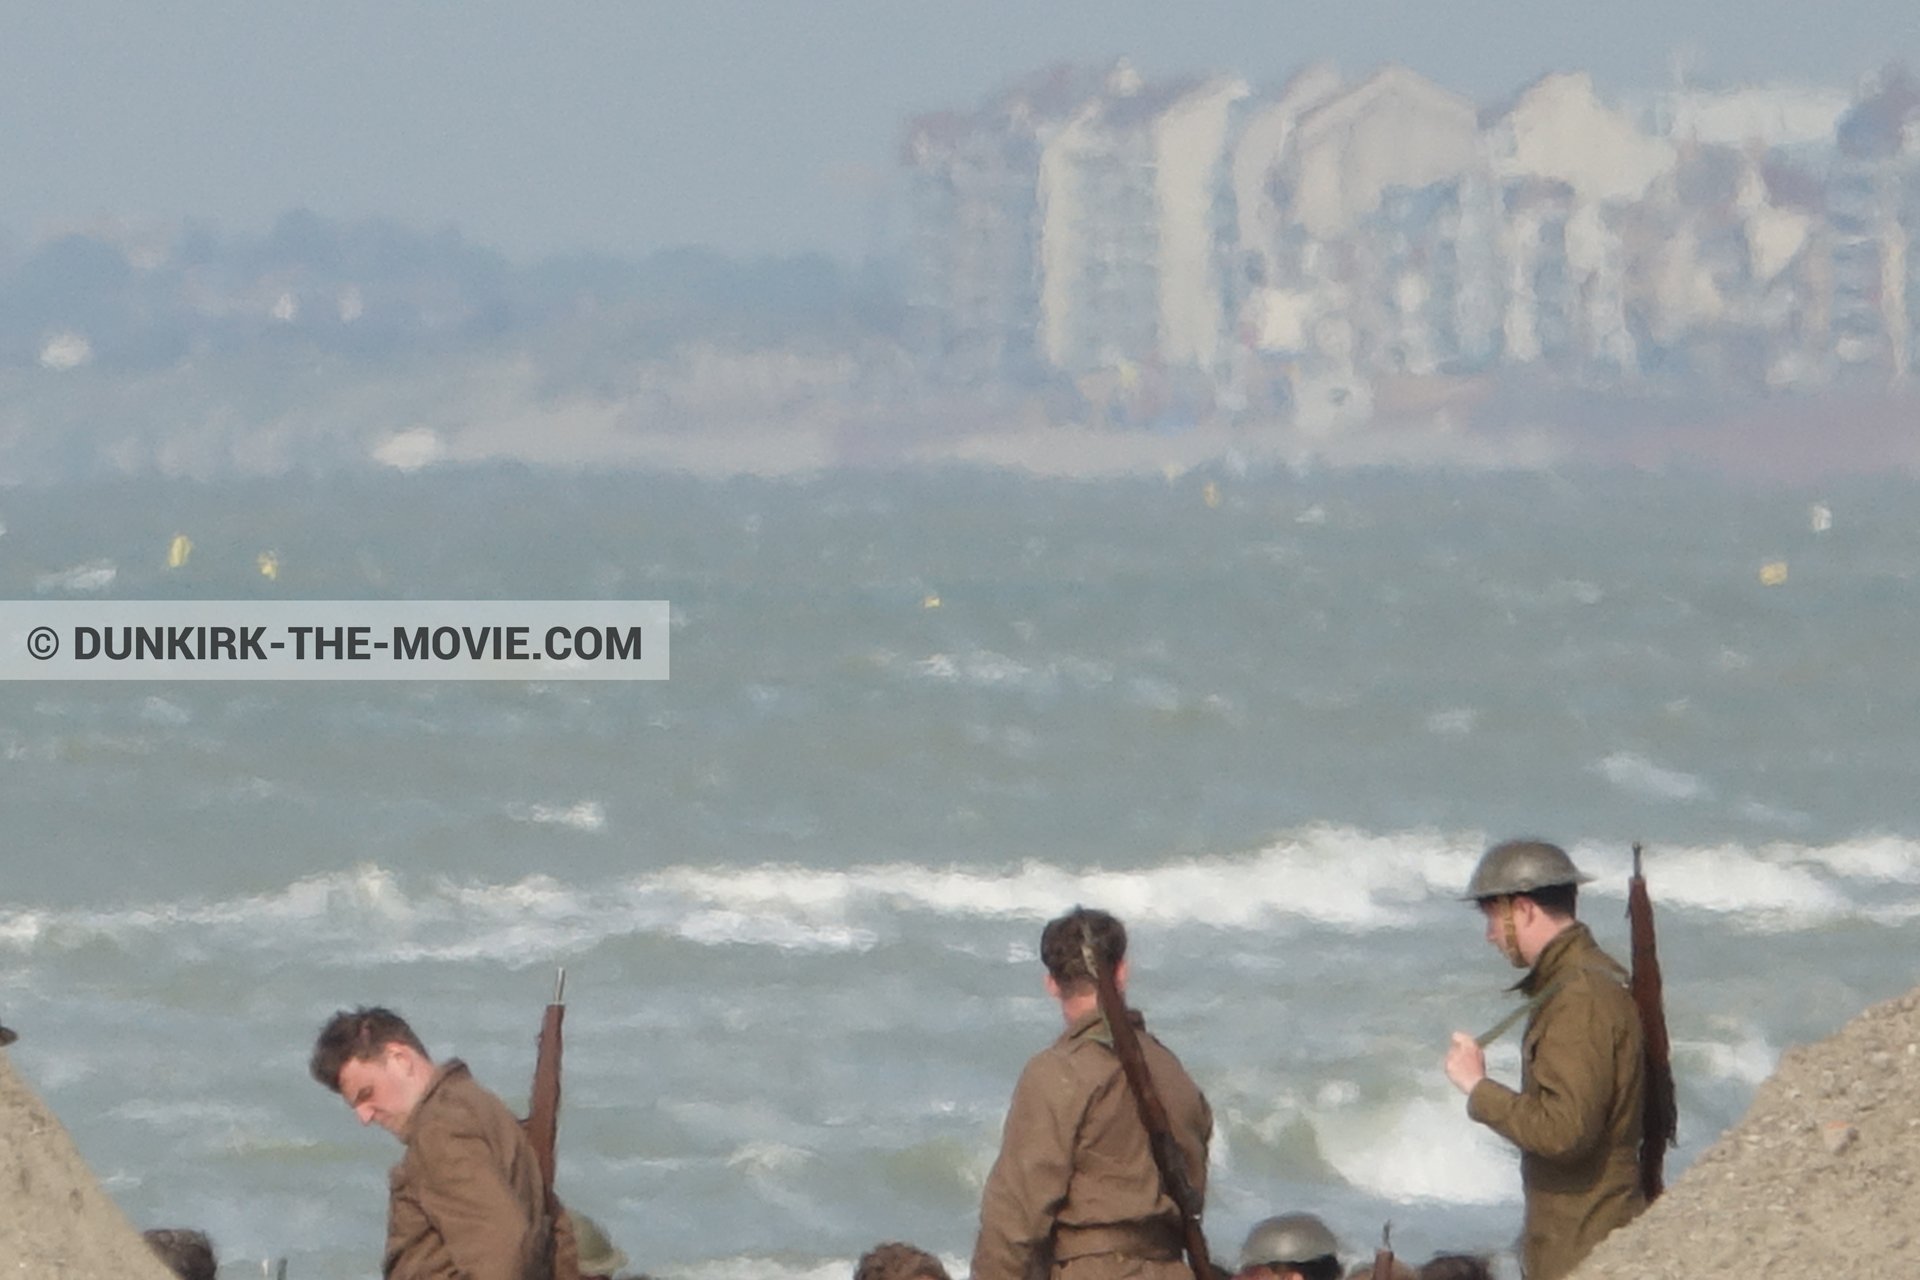 Picture with supernumeraries, rough sea, beach,  from behind the scene of the Dunkirk movie by Nolan